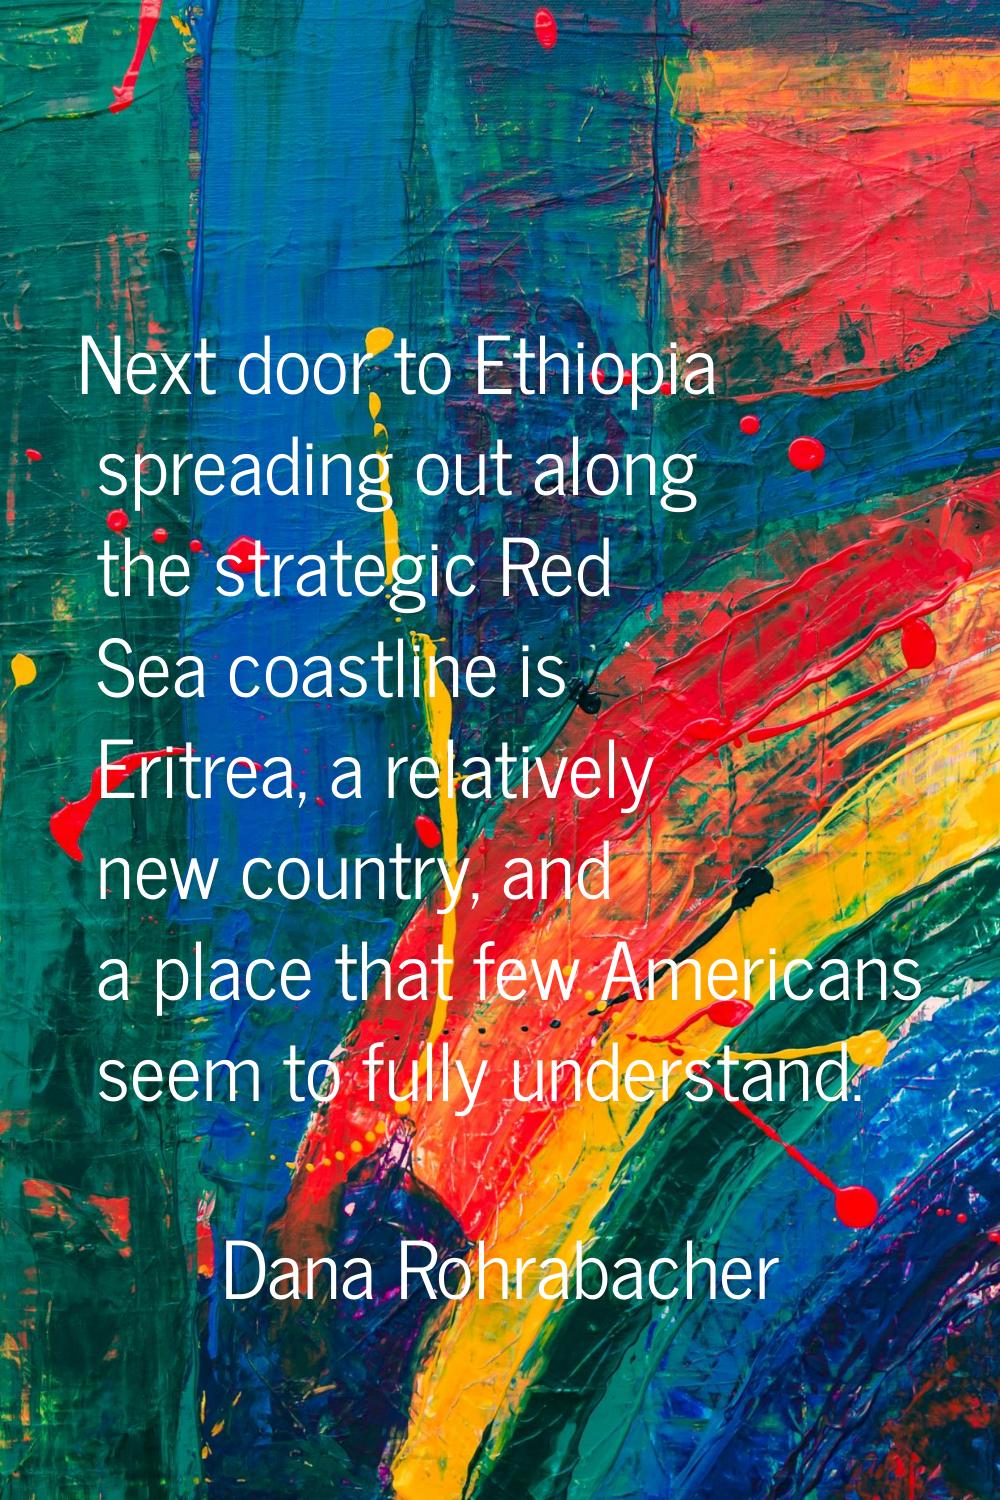 Next door to Ethiopia spreading out along the strategic Red Sea coastline is Eritrea, a relatively 